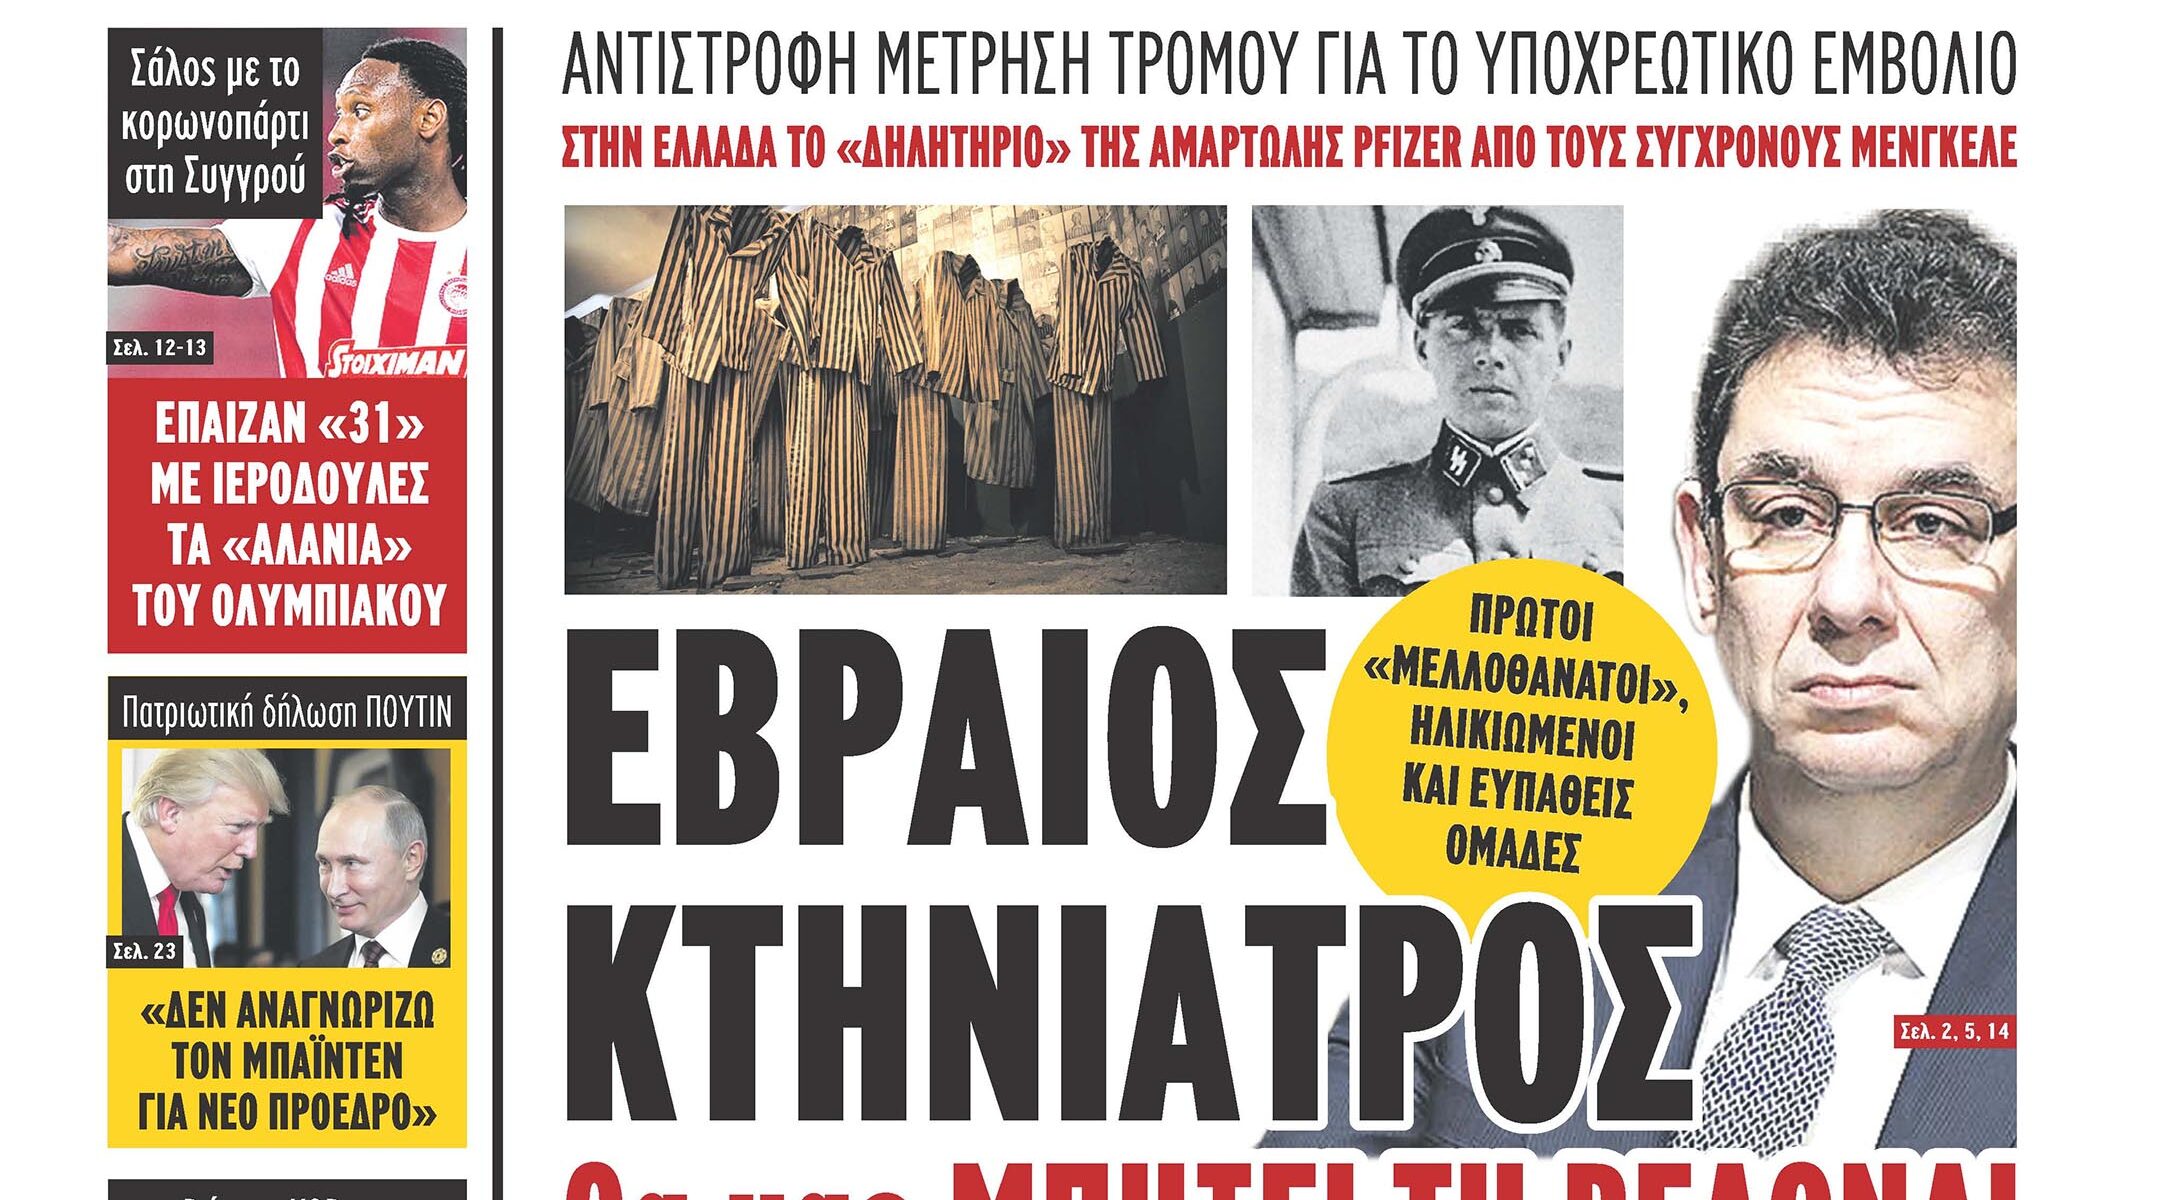 Pfizer CEO Albert Bourla, pictured right, is juxtaposed with Josef Mengele on the front page of the Makeleio daily in Greece on Nov. 10, 2020. (Courtesy of the Central Board of Jewish Communities in Greece)